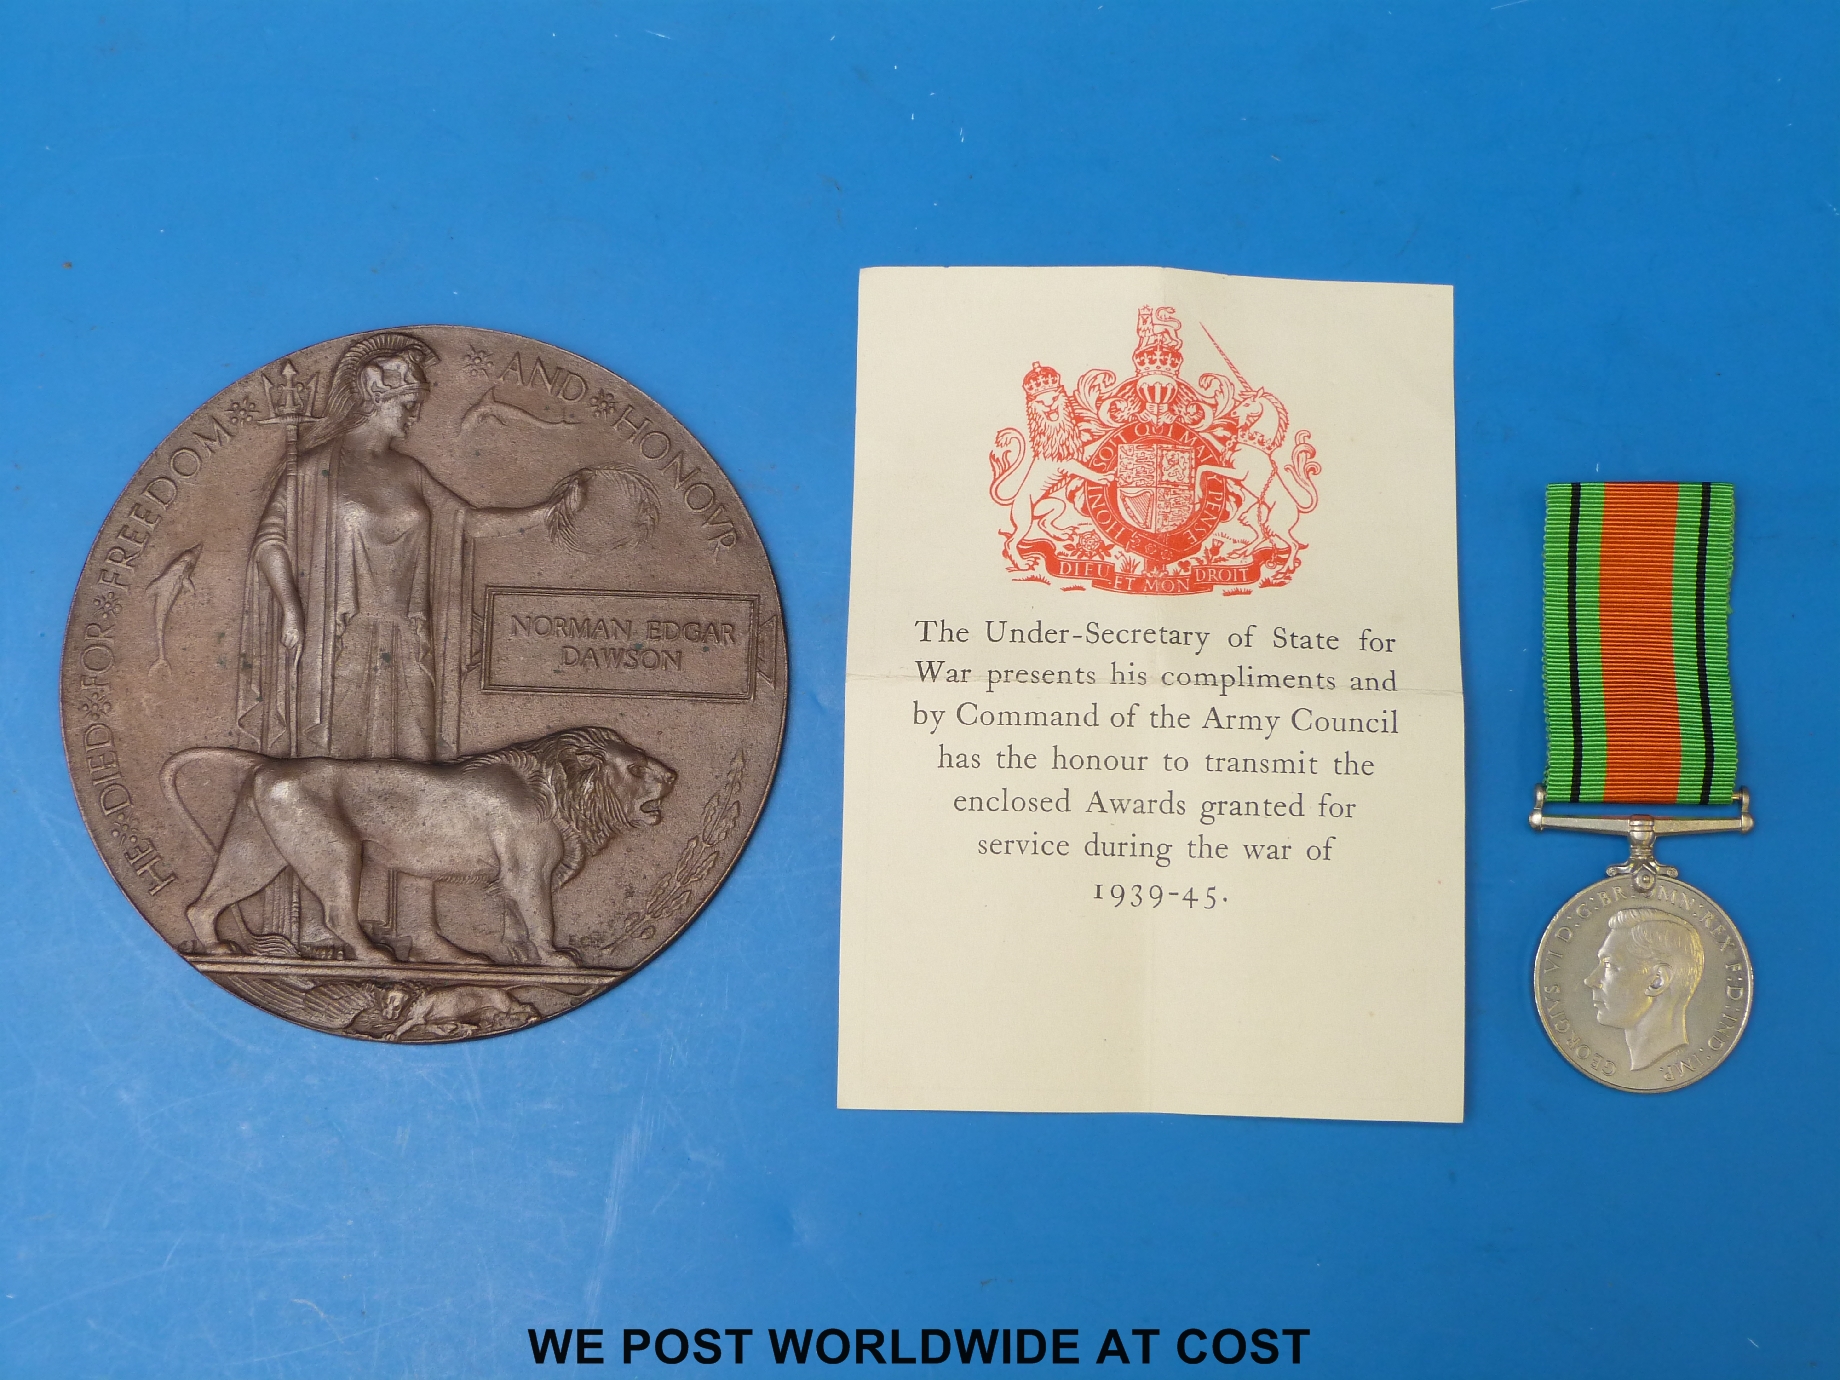 A WWI death plaque for Norman Edgar Dawson and a WWII defence medal